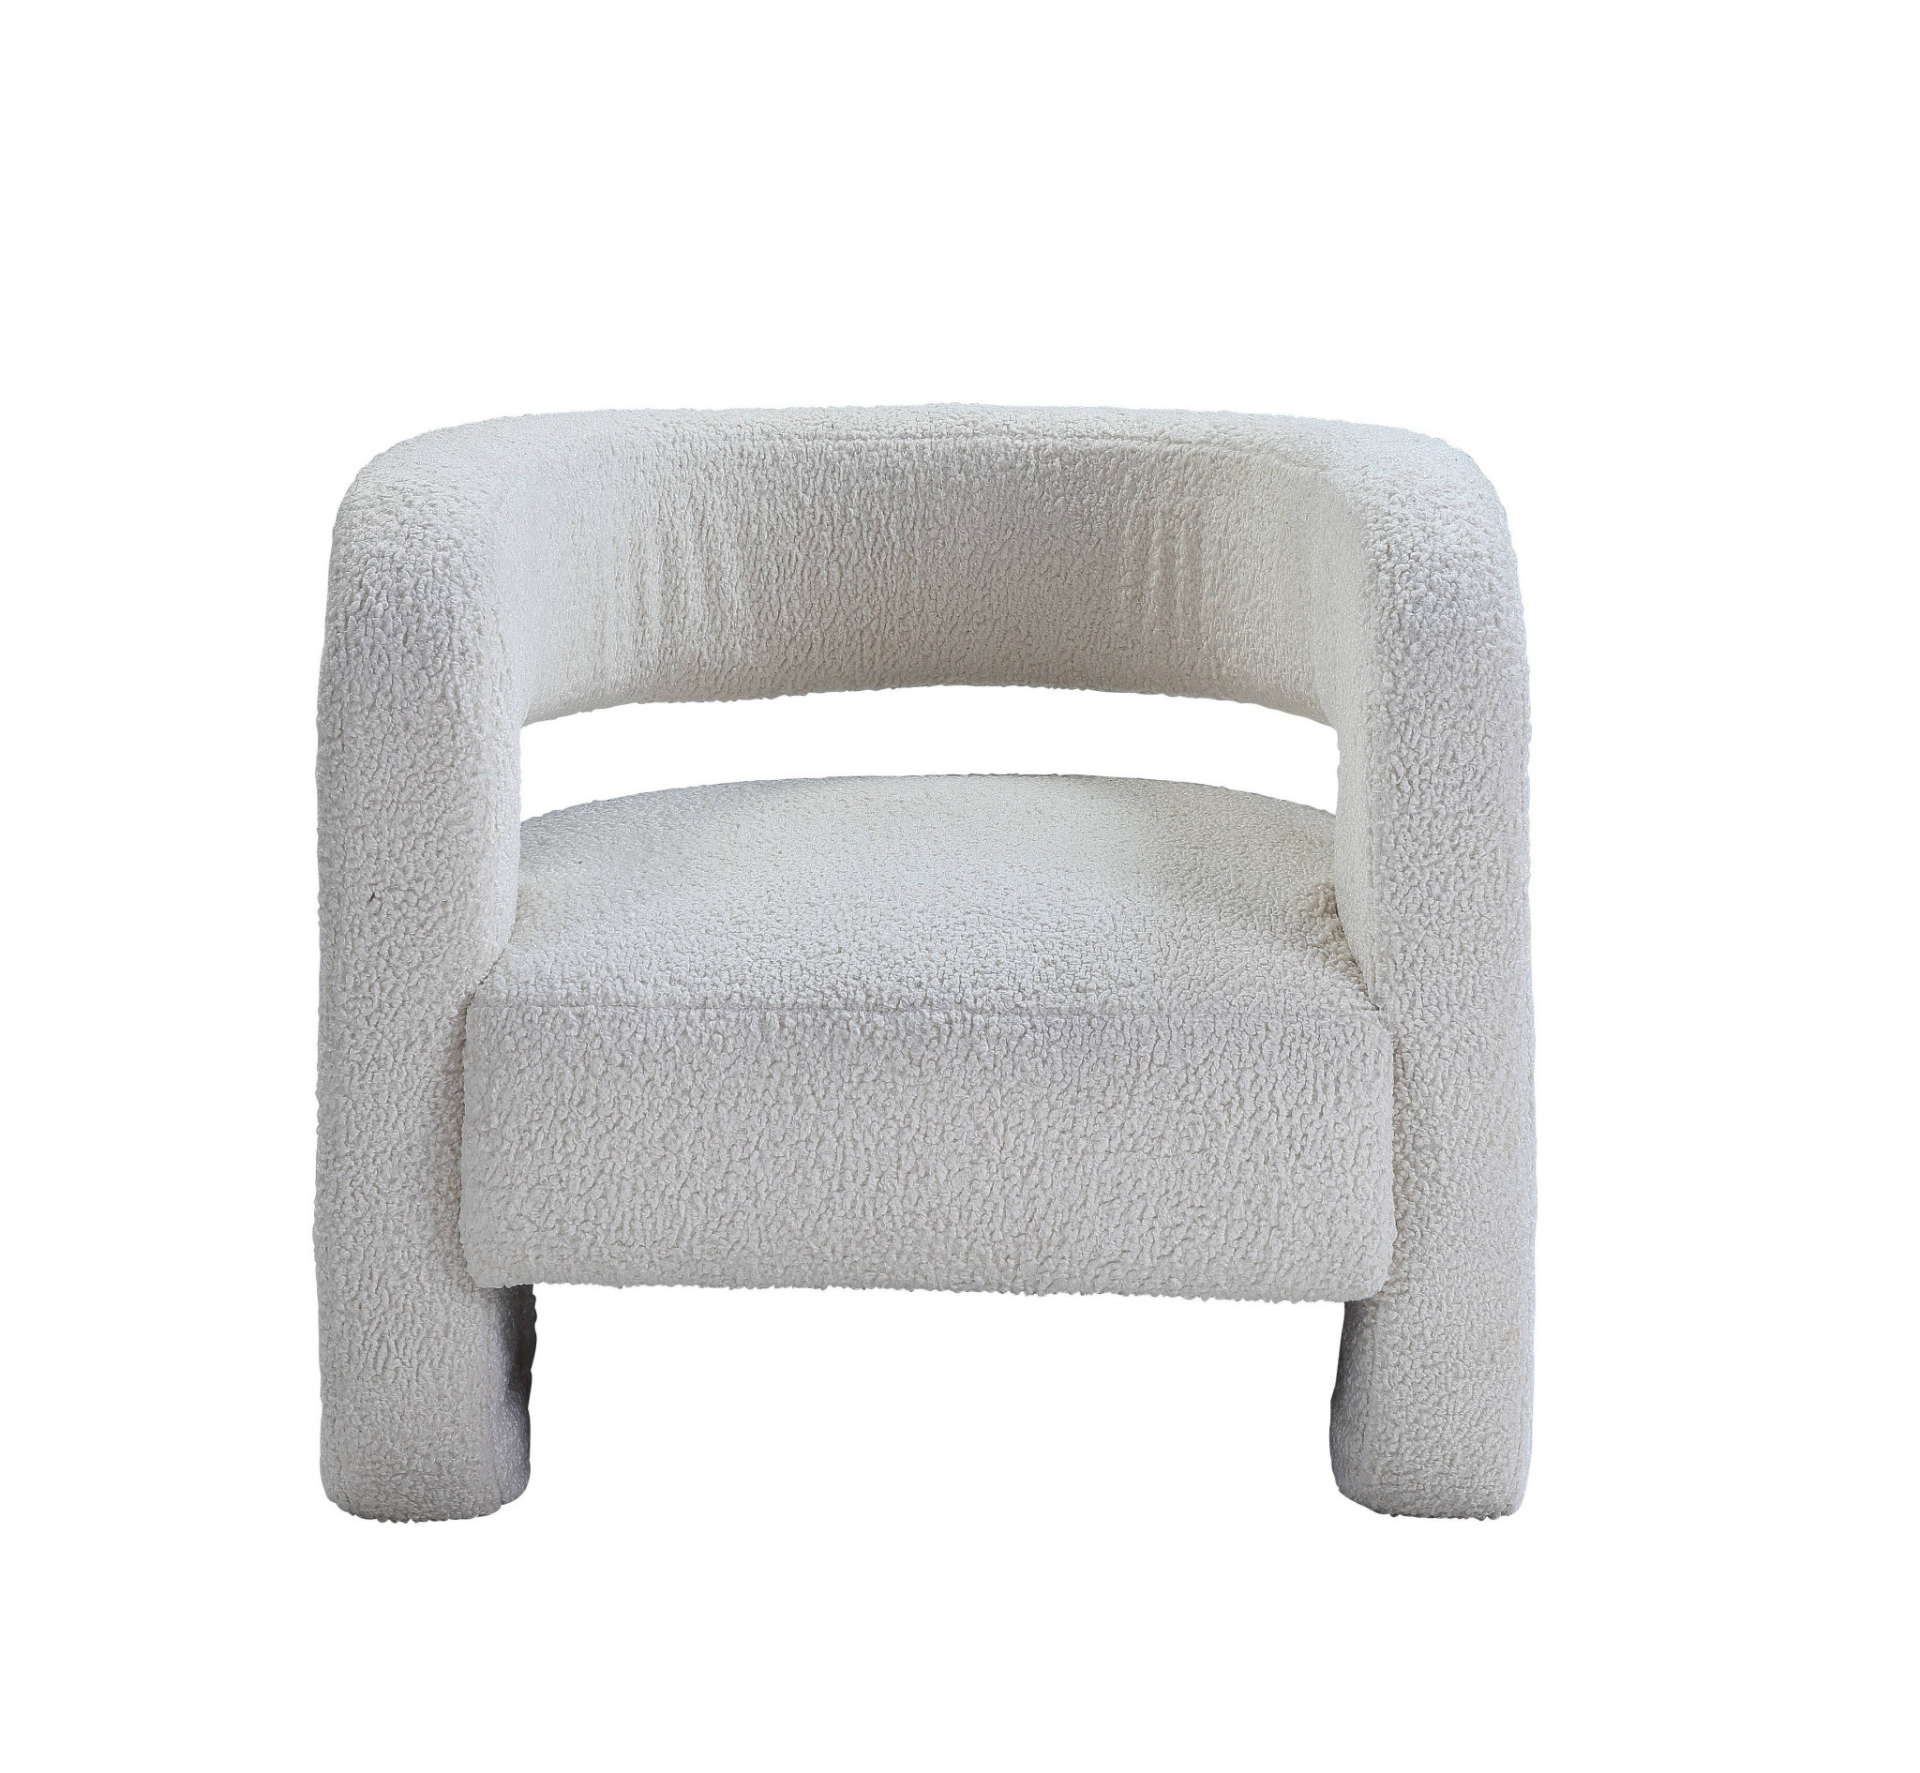 32" White Sherpa Solid Color Barrel Chair